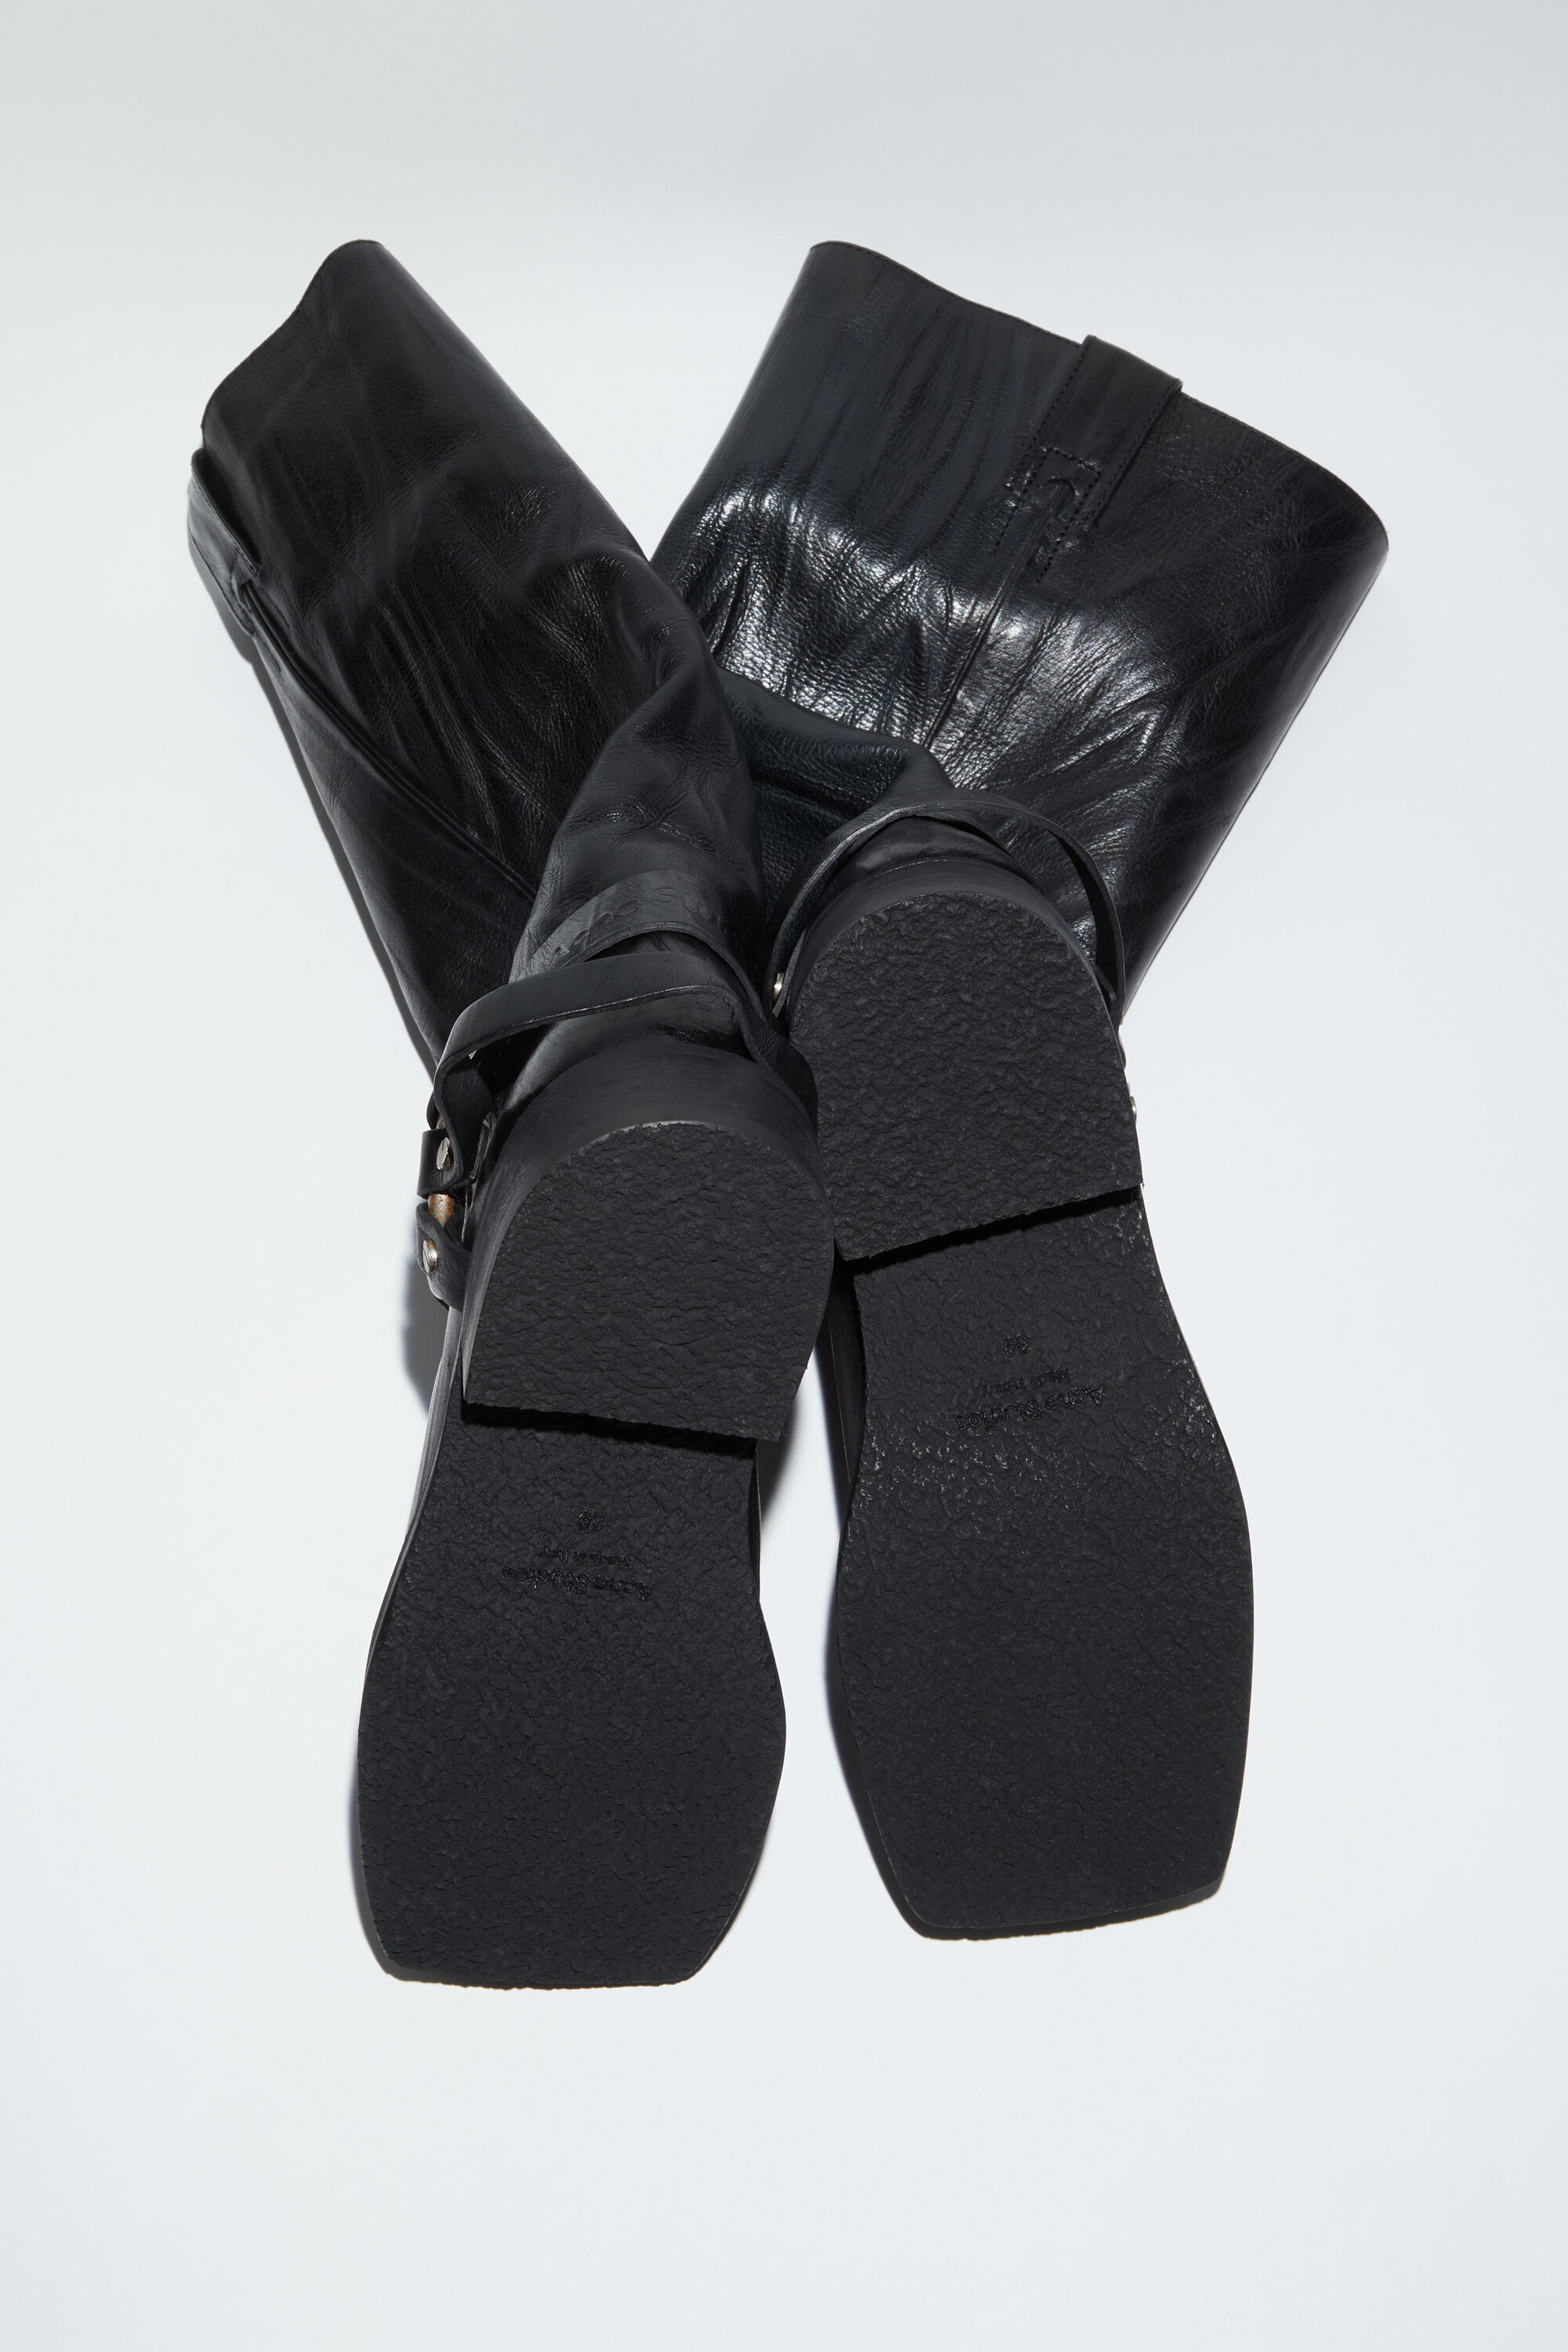 Acne Studios - Leather buckle boots - Anthracite grey